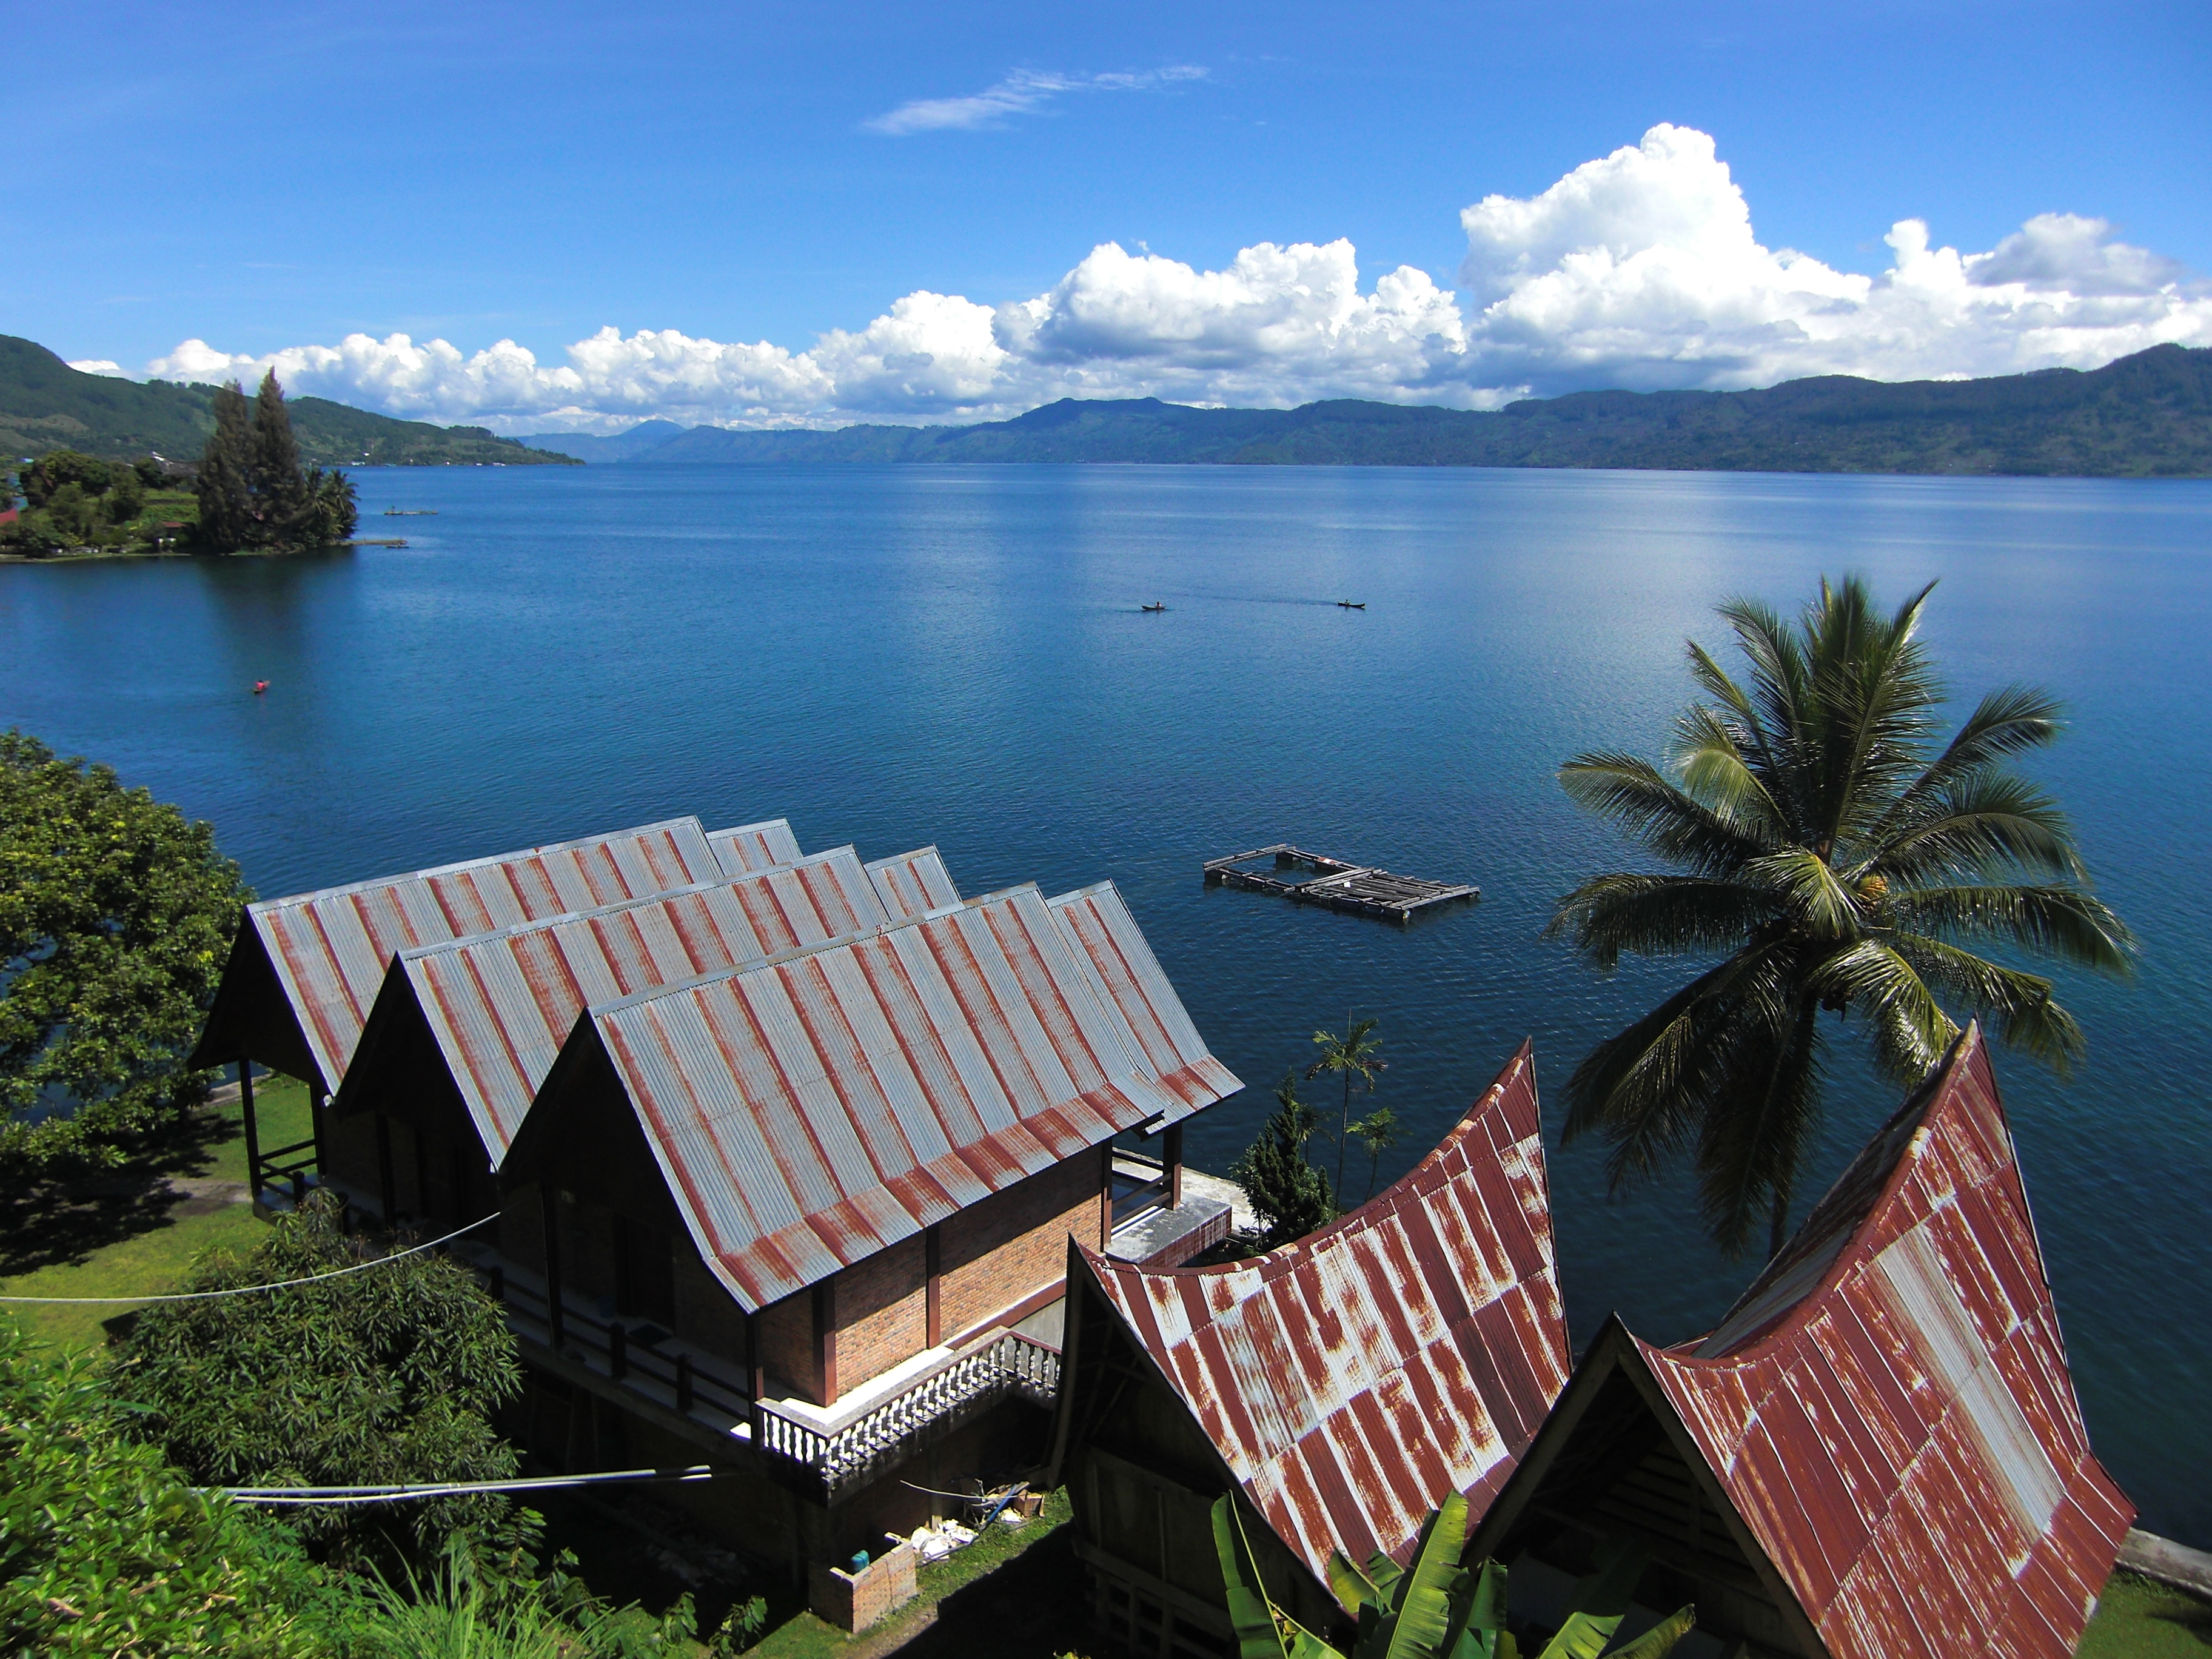 Download this Lake Toba picture